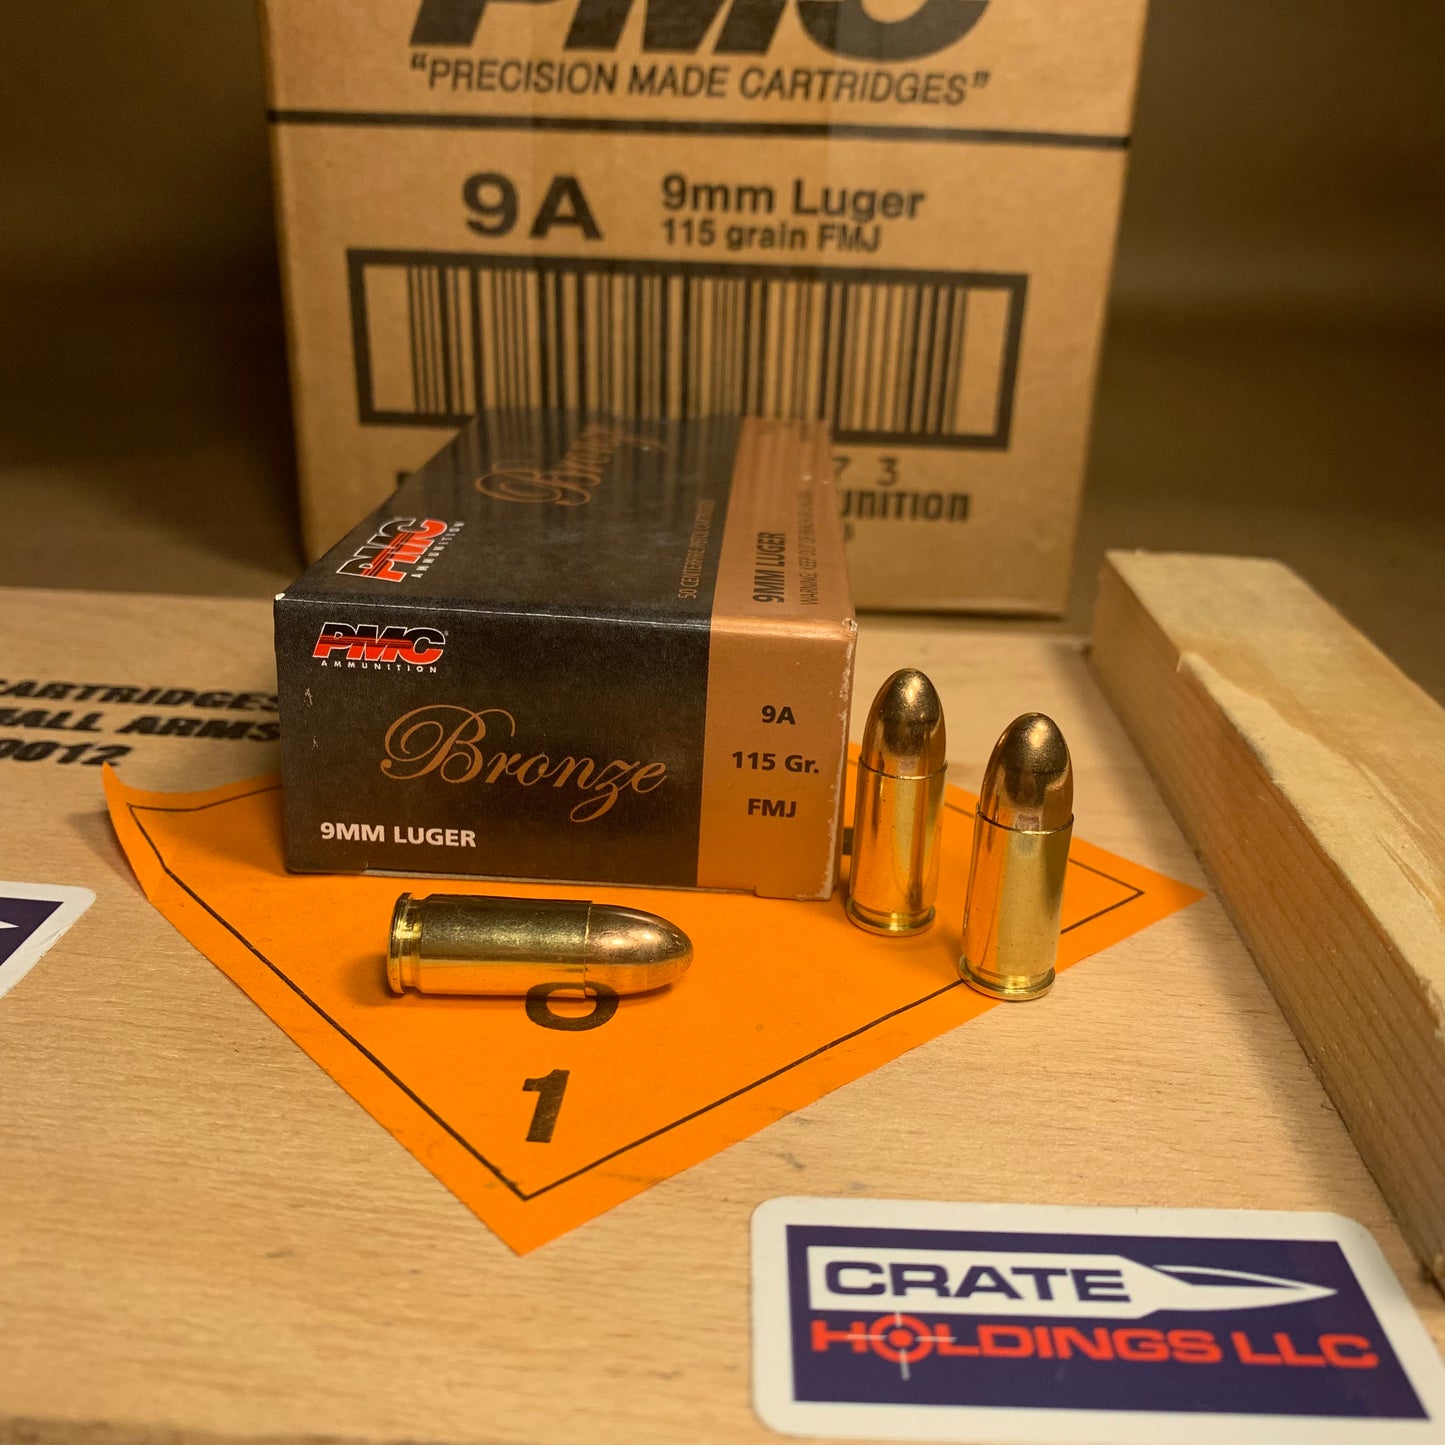 1000 Round Case of PMC Bronze 9mm Luger Ammo 115gr FMJ - 9A